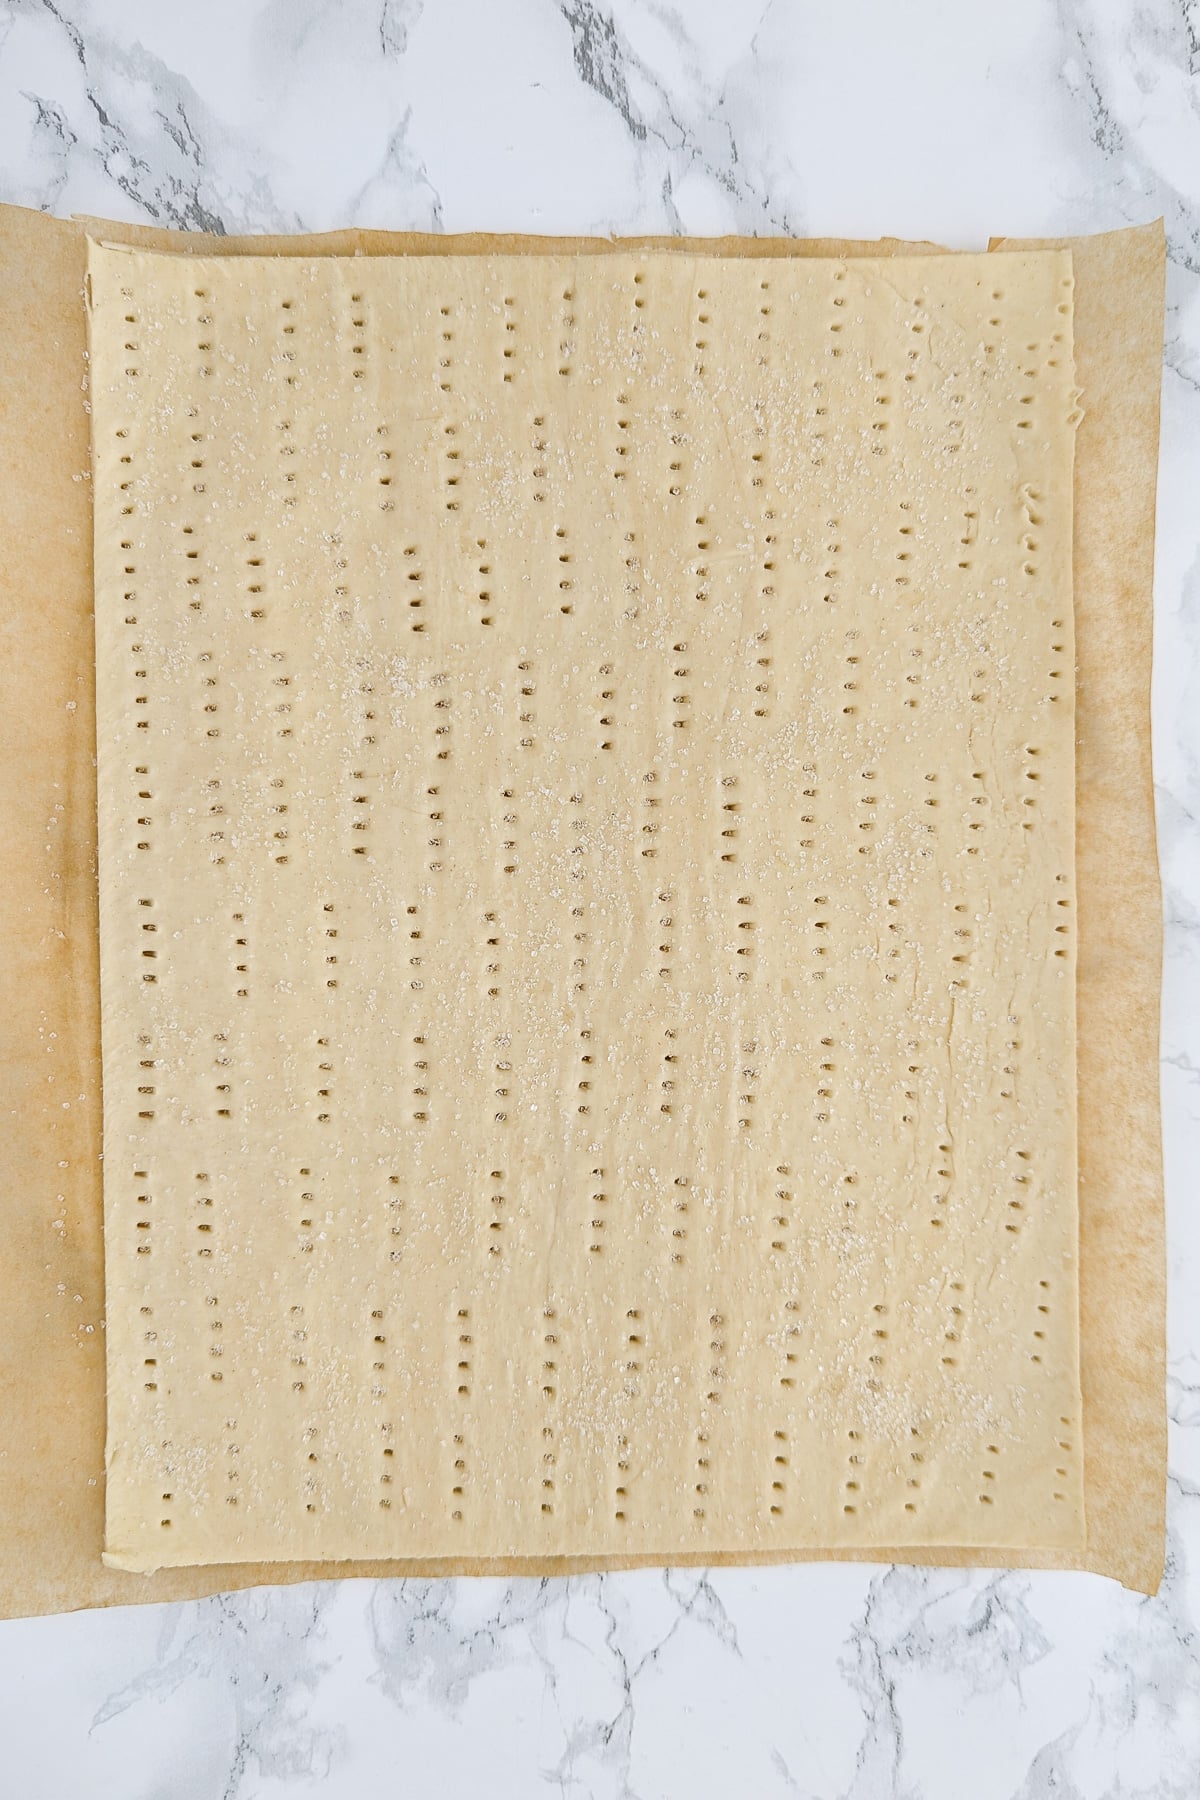 A slice of dough sprinkled with sugar on a parchment paper on a marble table.